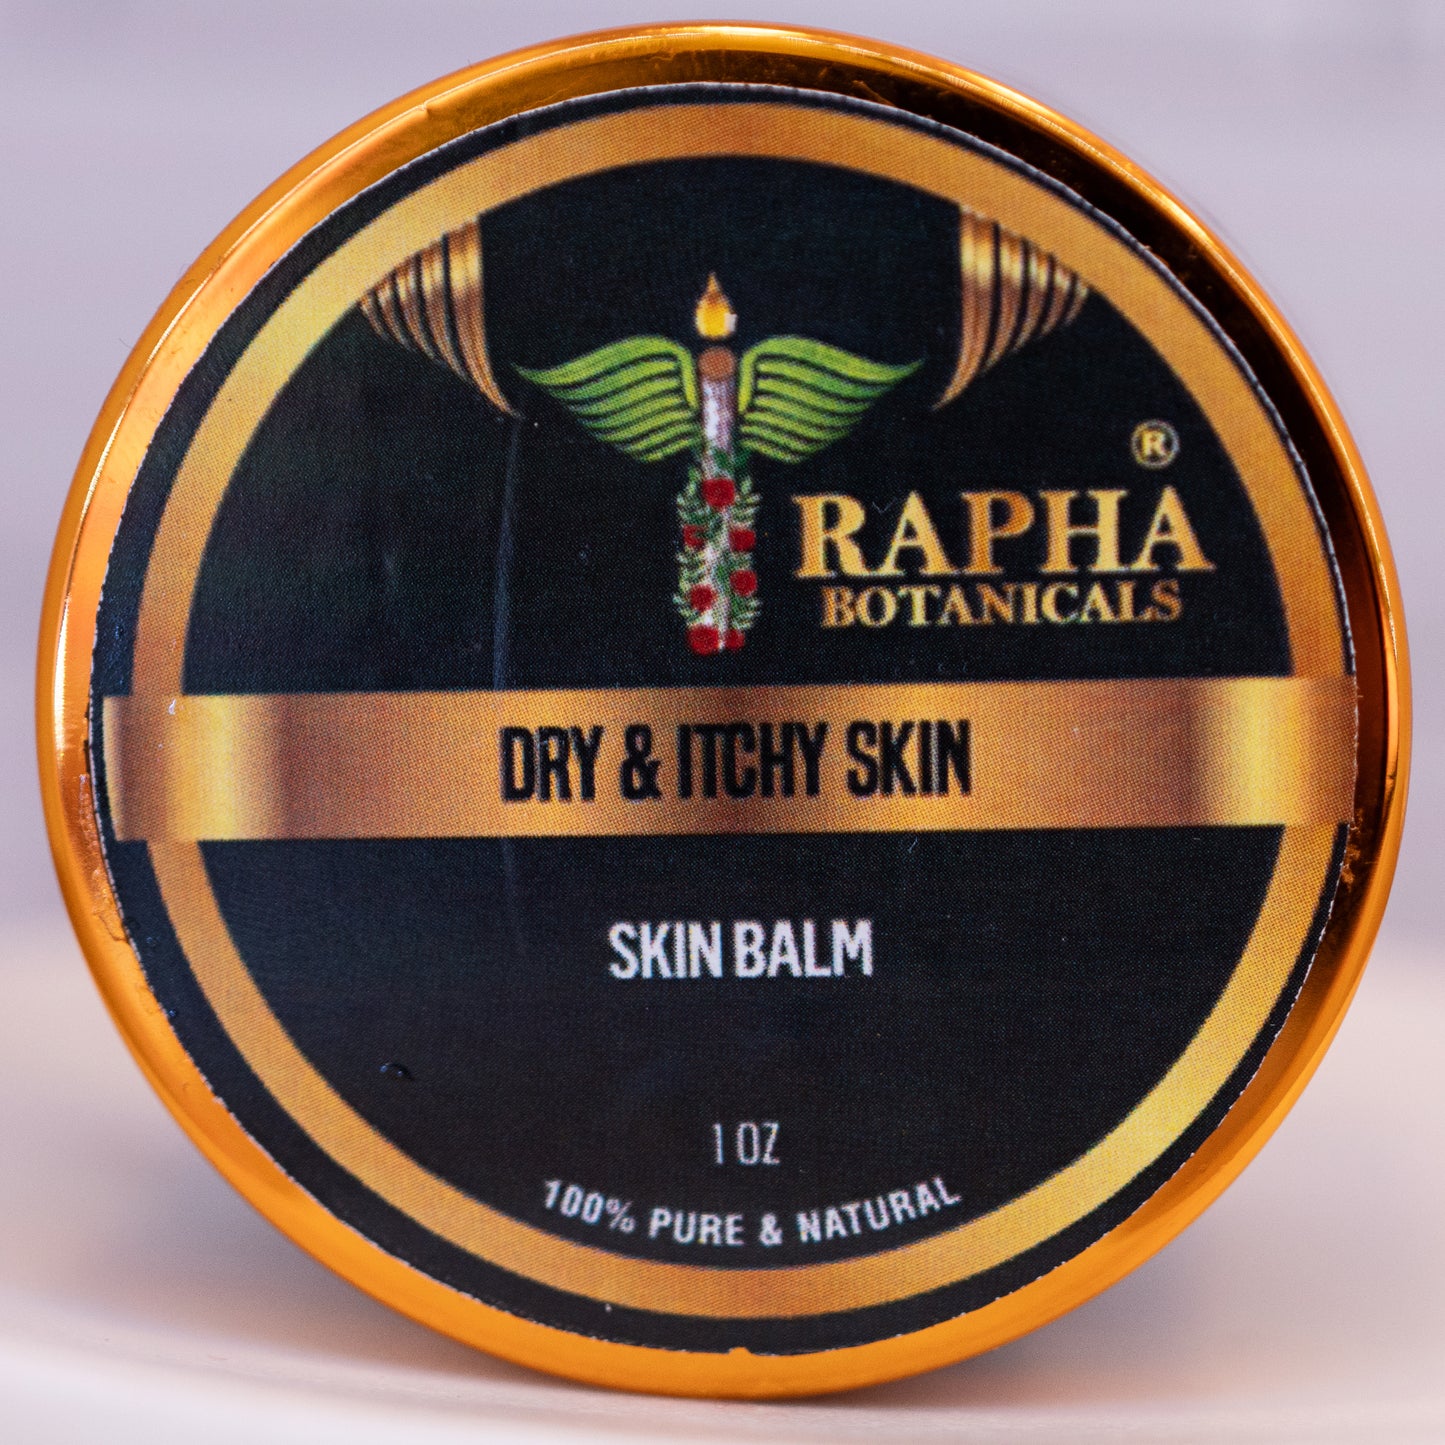 Dry & Itchy Skin Balm